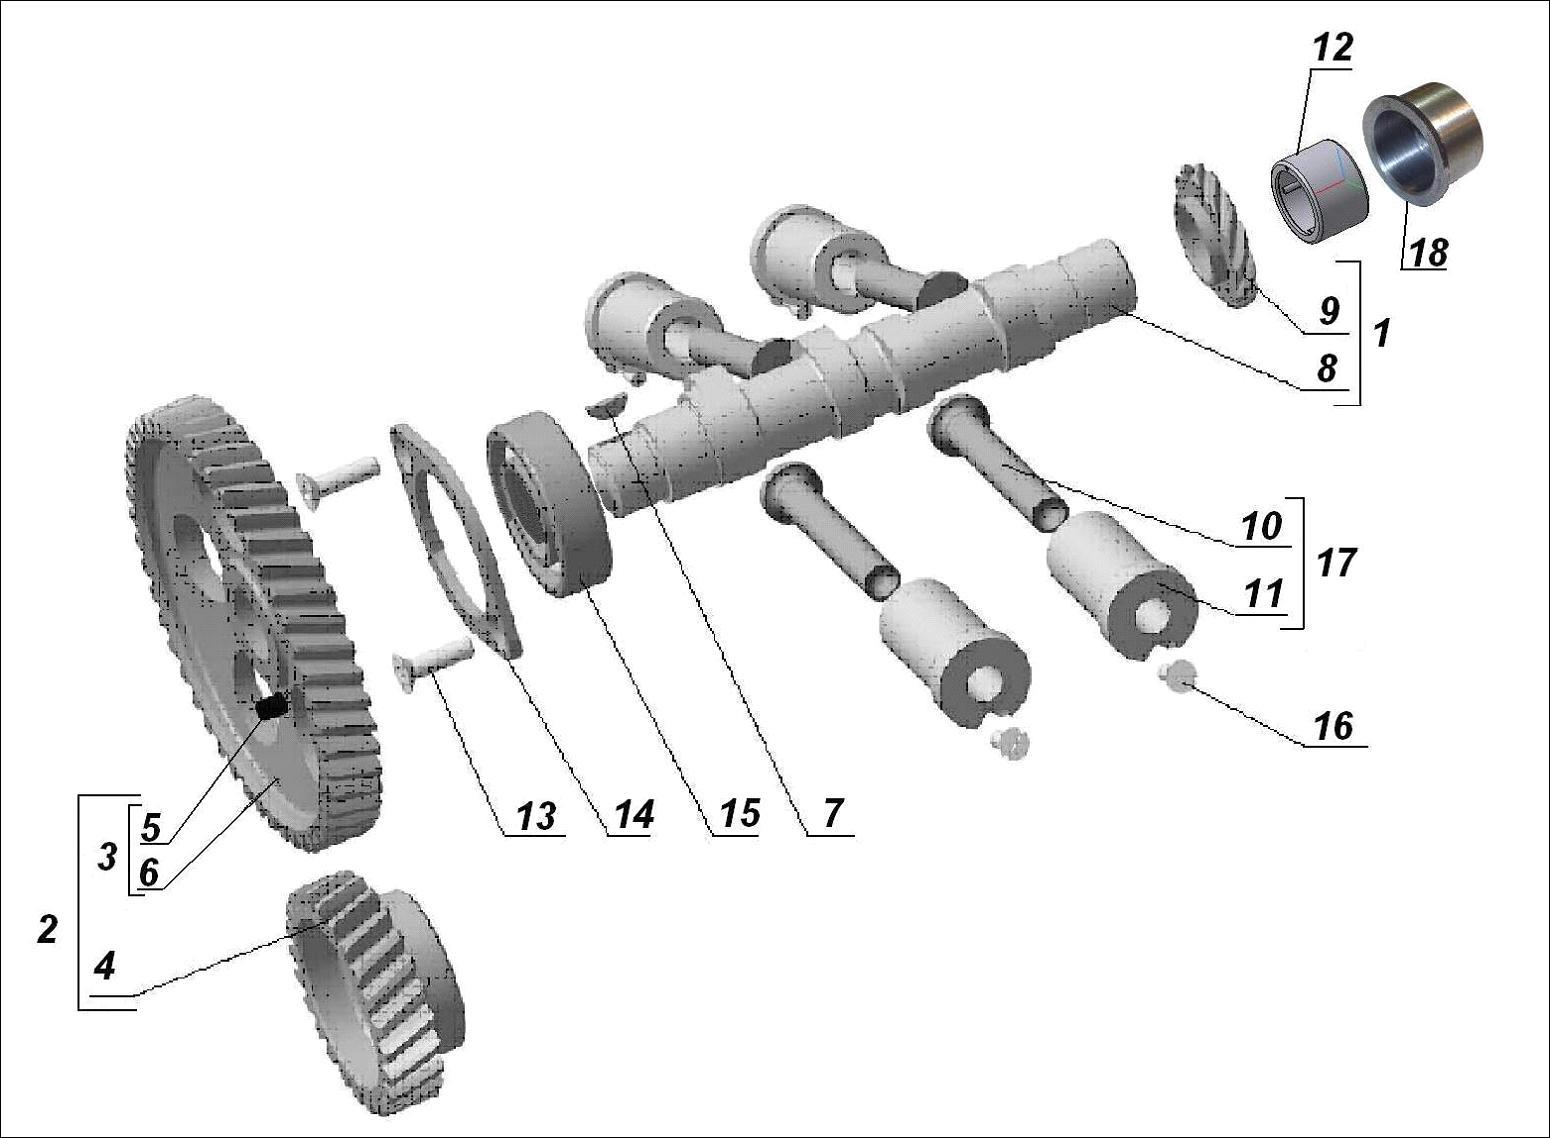 Camshaft and valve train components